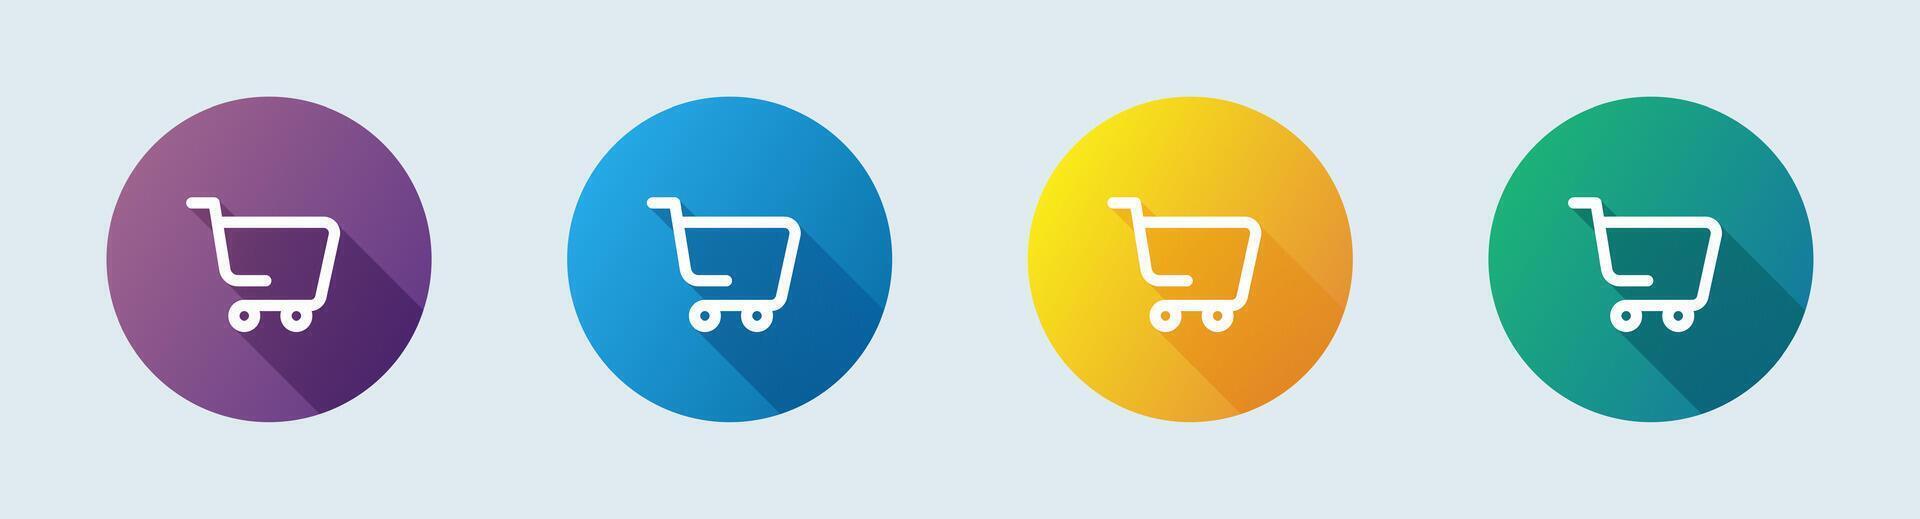 Shopping cart line icon in flat design style. Buy signs vector illustration.